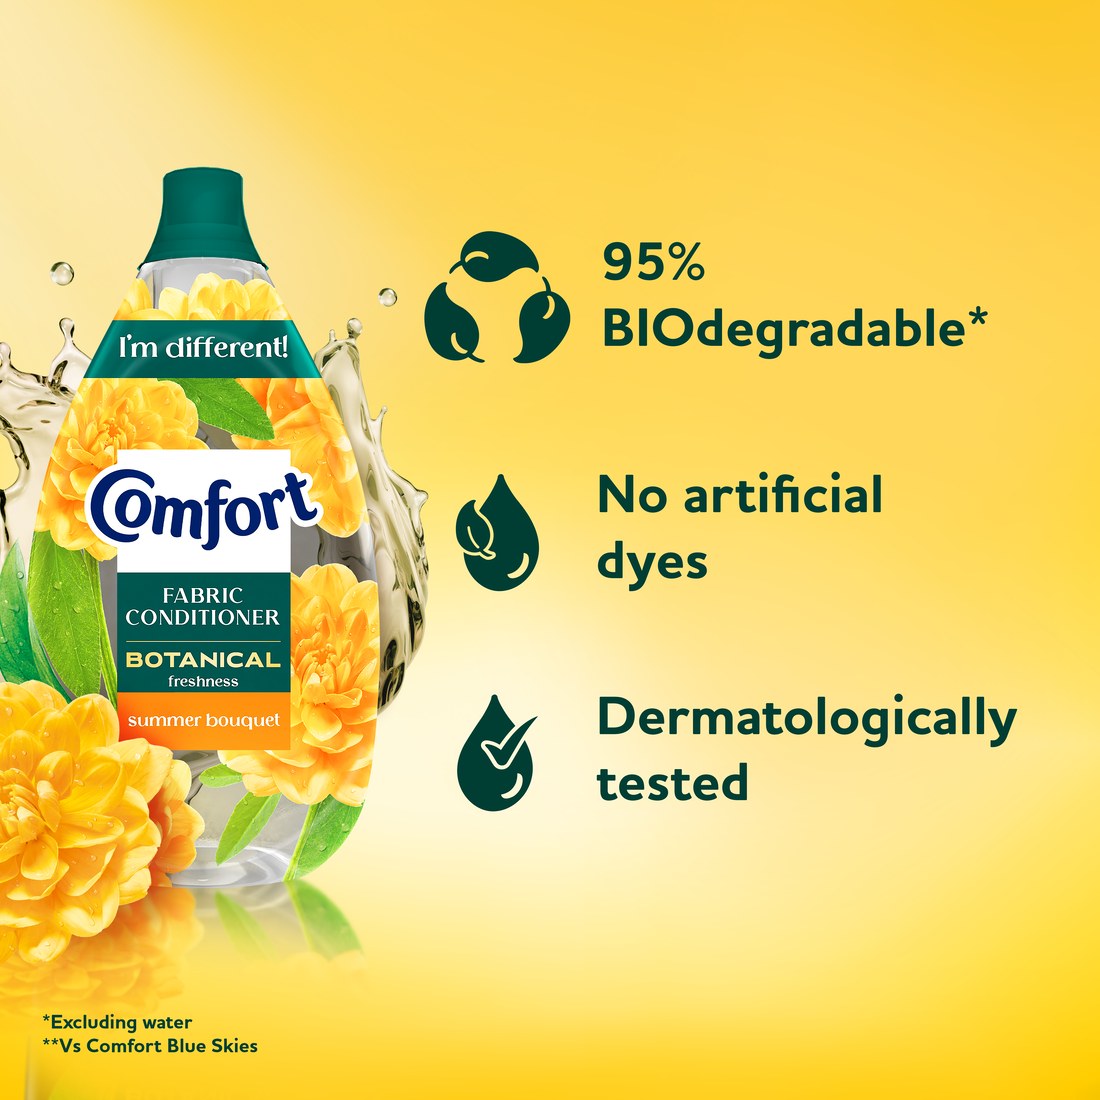 95% bio-degradable*
No artificial dyes
Dermatologically tested

*excluding water
**versus Comfort Blue Skies